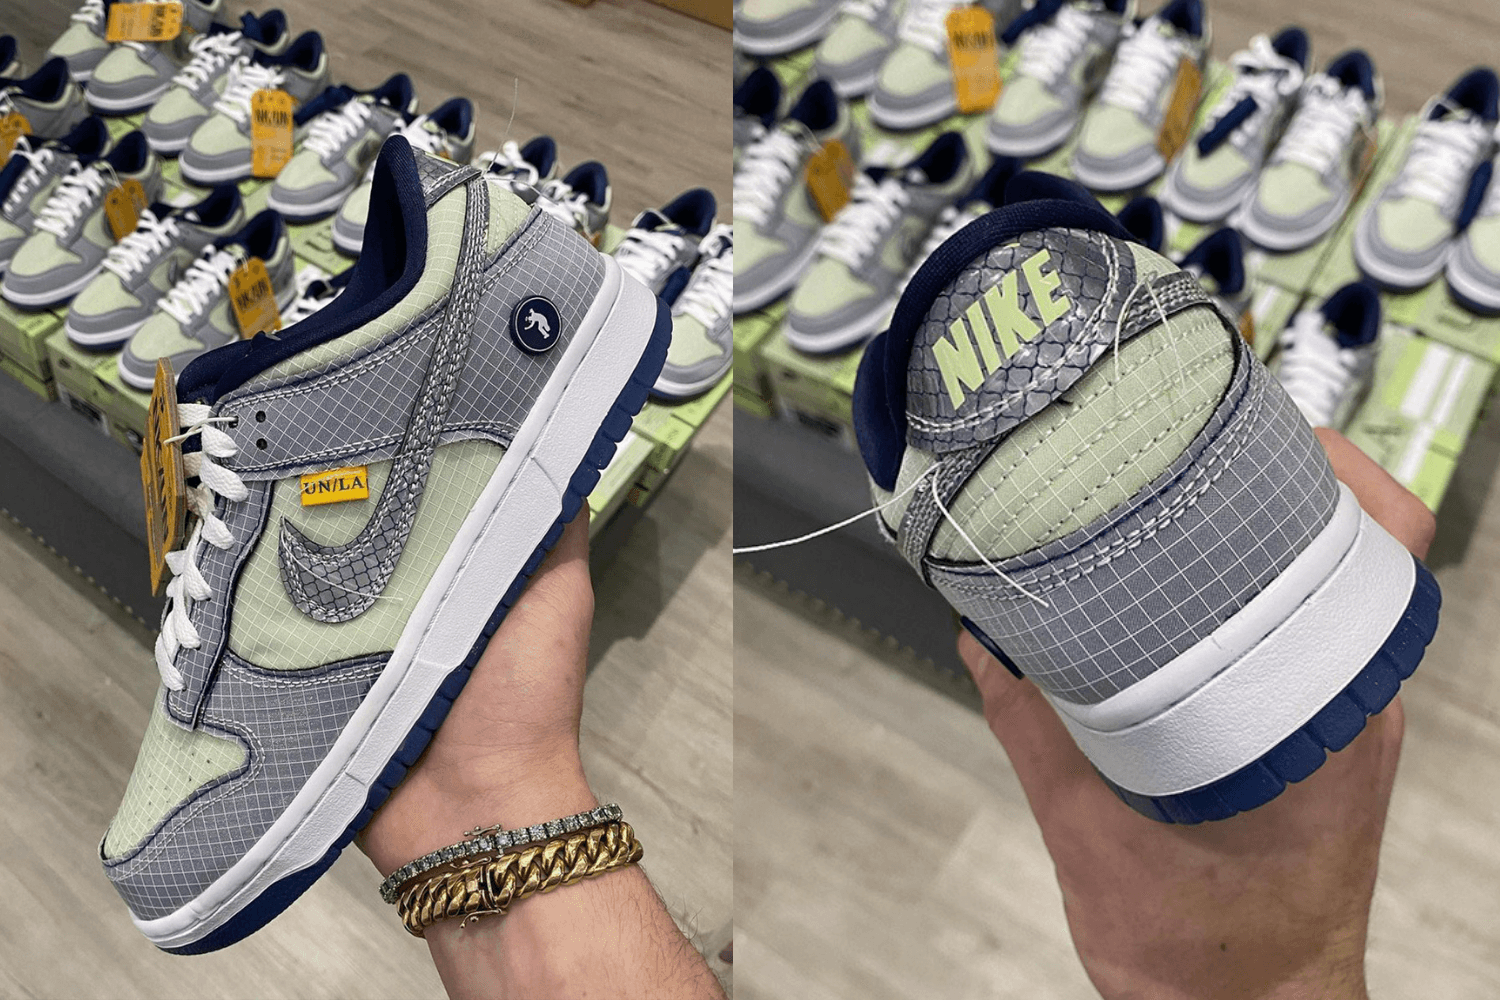 New colorway released of the Union LA x Nike Dunk Low